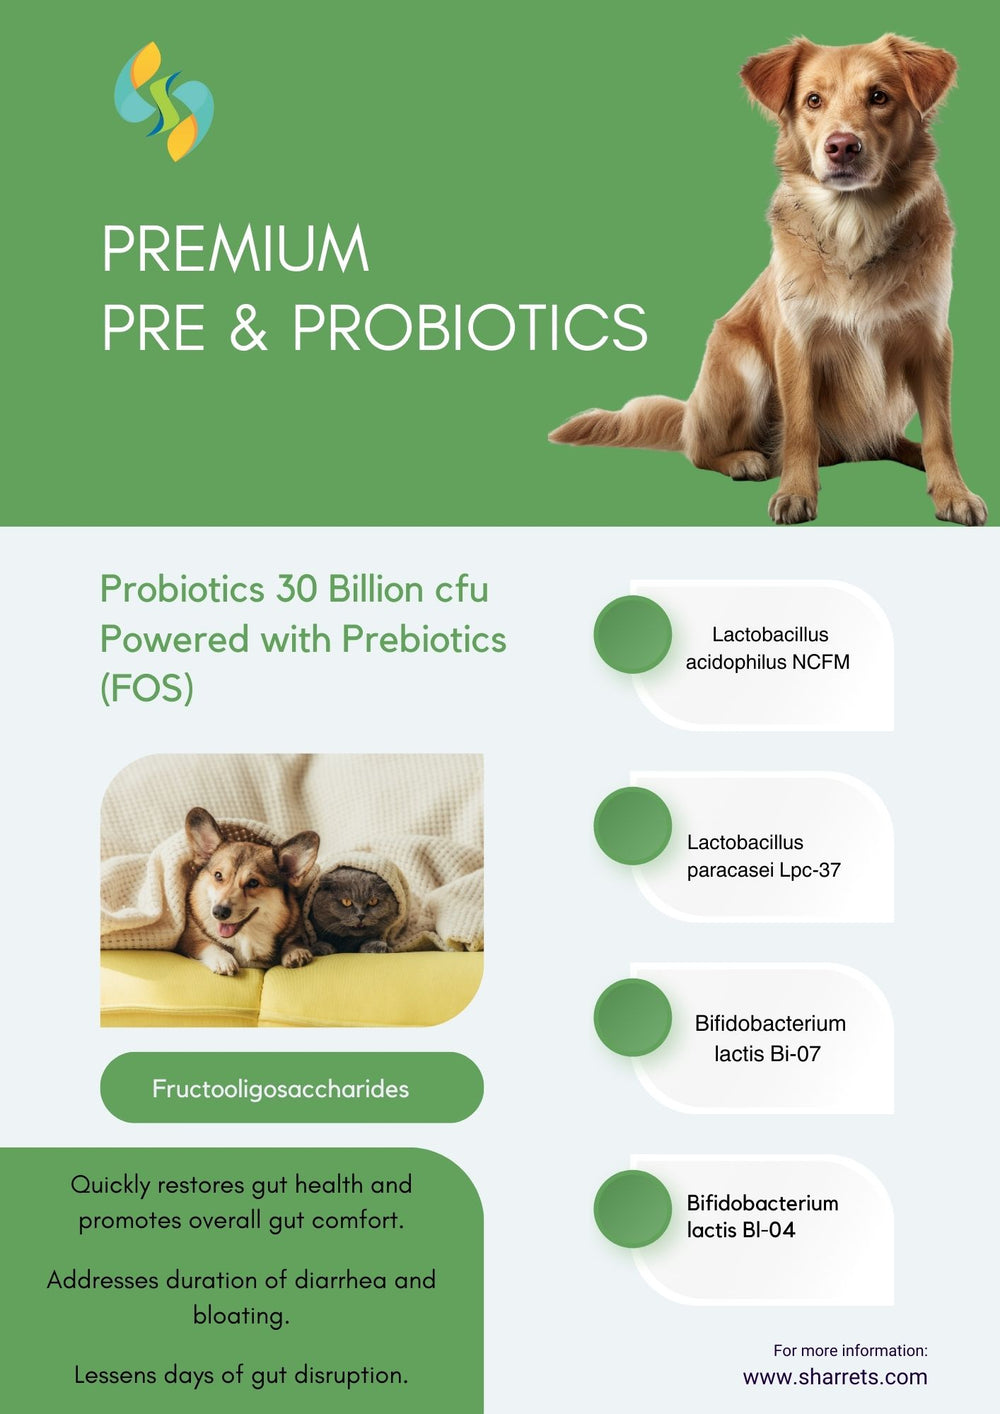 Pre and Probiotic Capsules for Pets